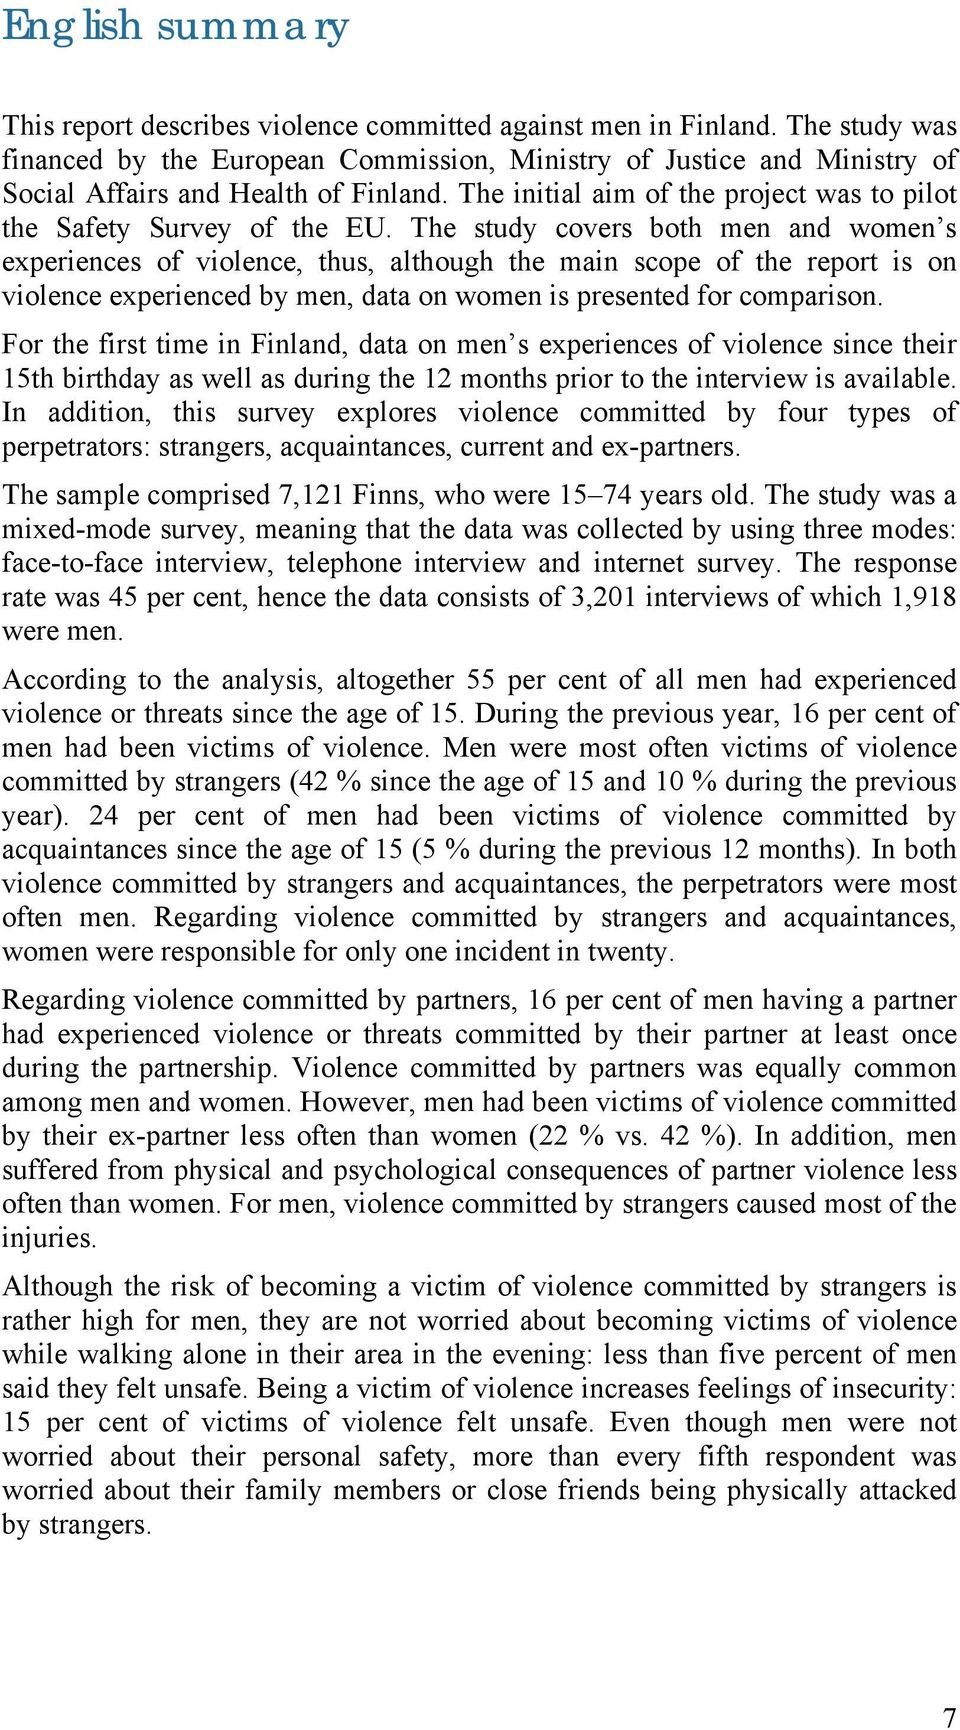 The study covers both men and women s experiences of violence, thus, although the main scope of the report is on violence experienced by men, data on women is presented for comparison.